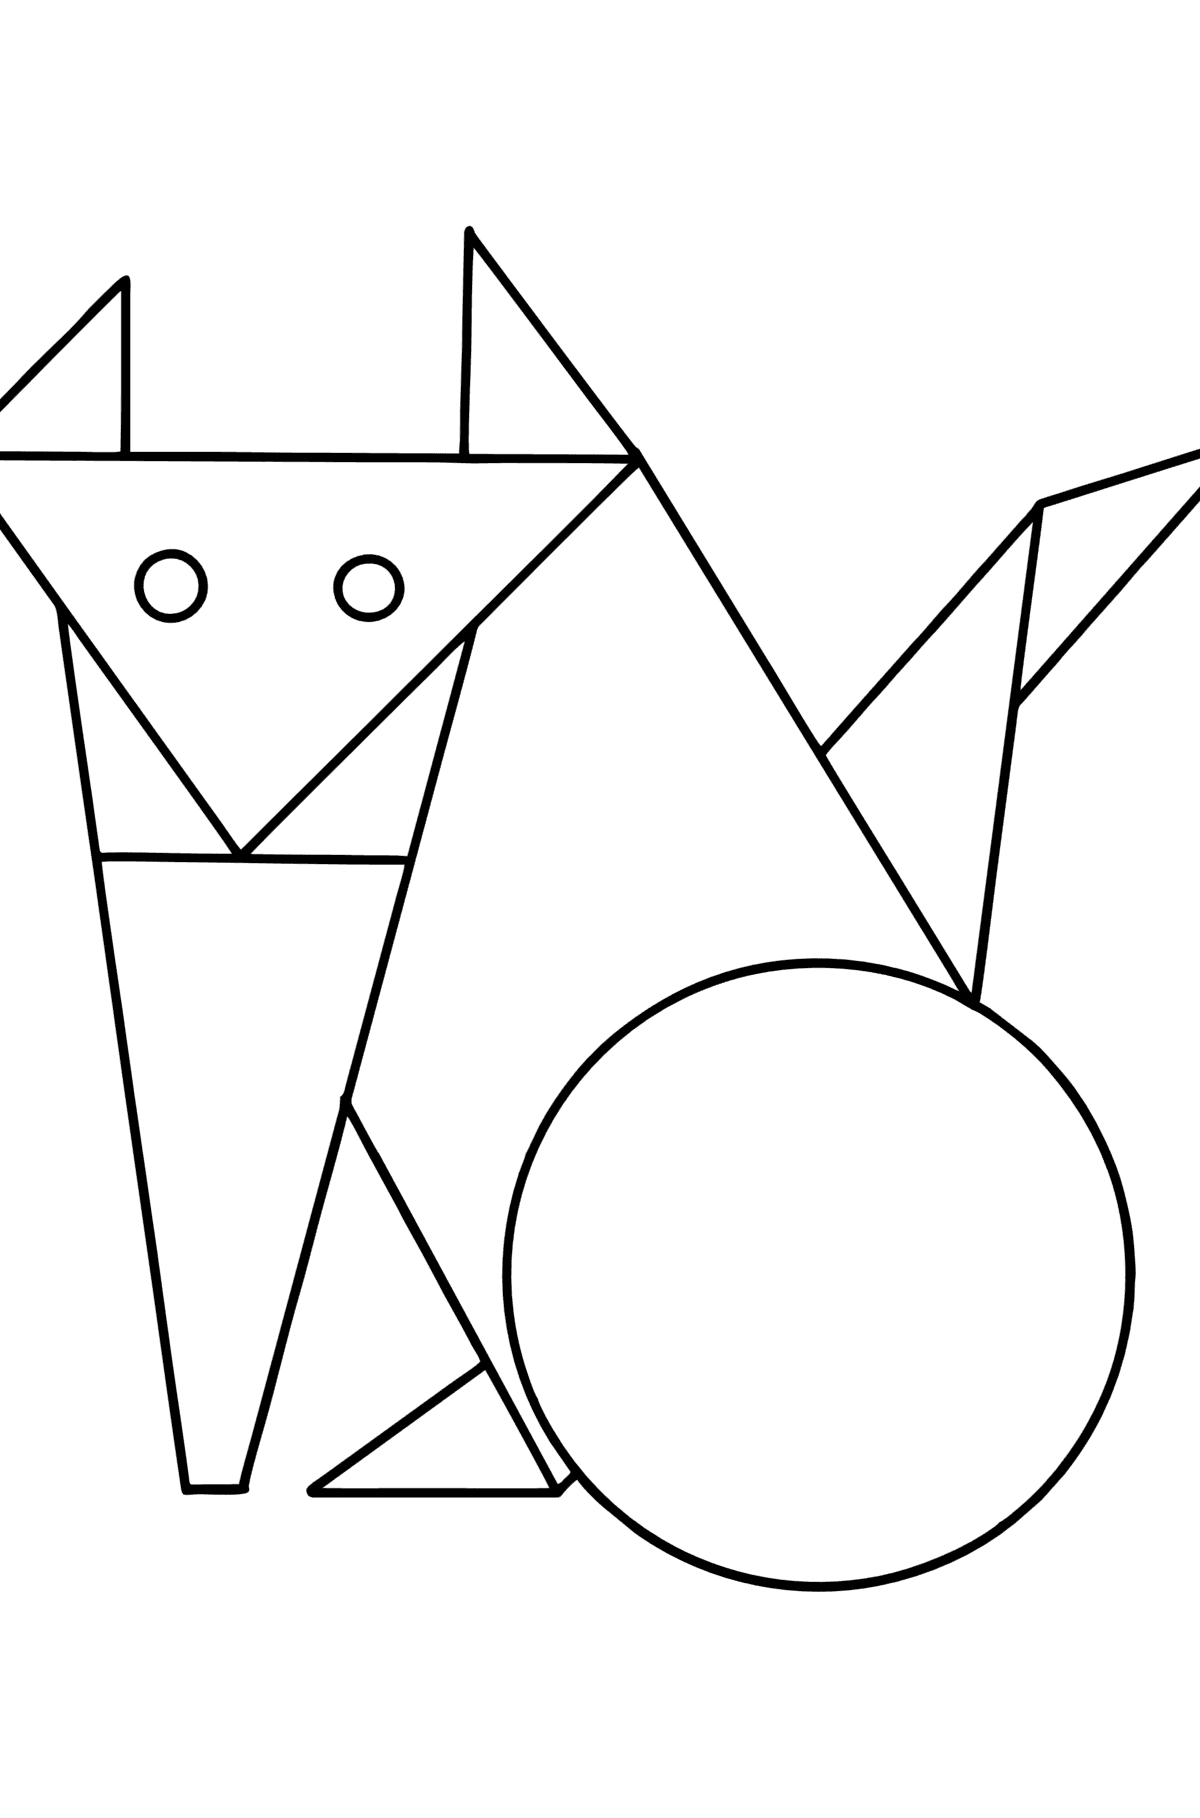 Geometric Kitten coloring page - Coloring Pages for Kids